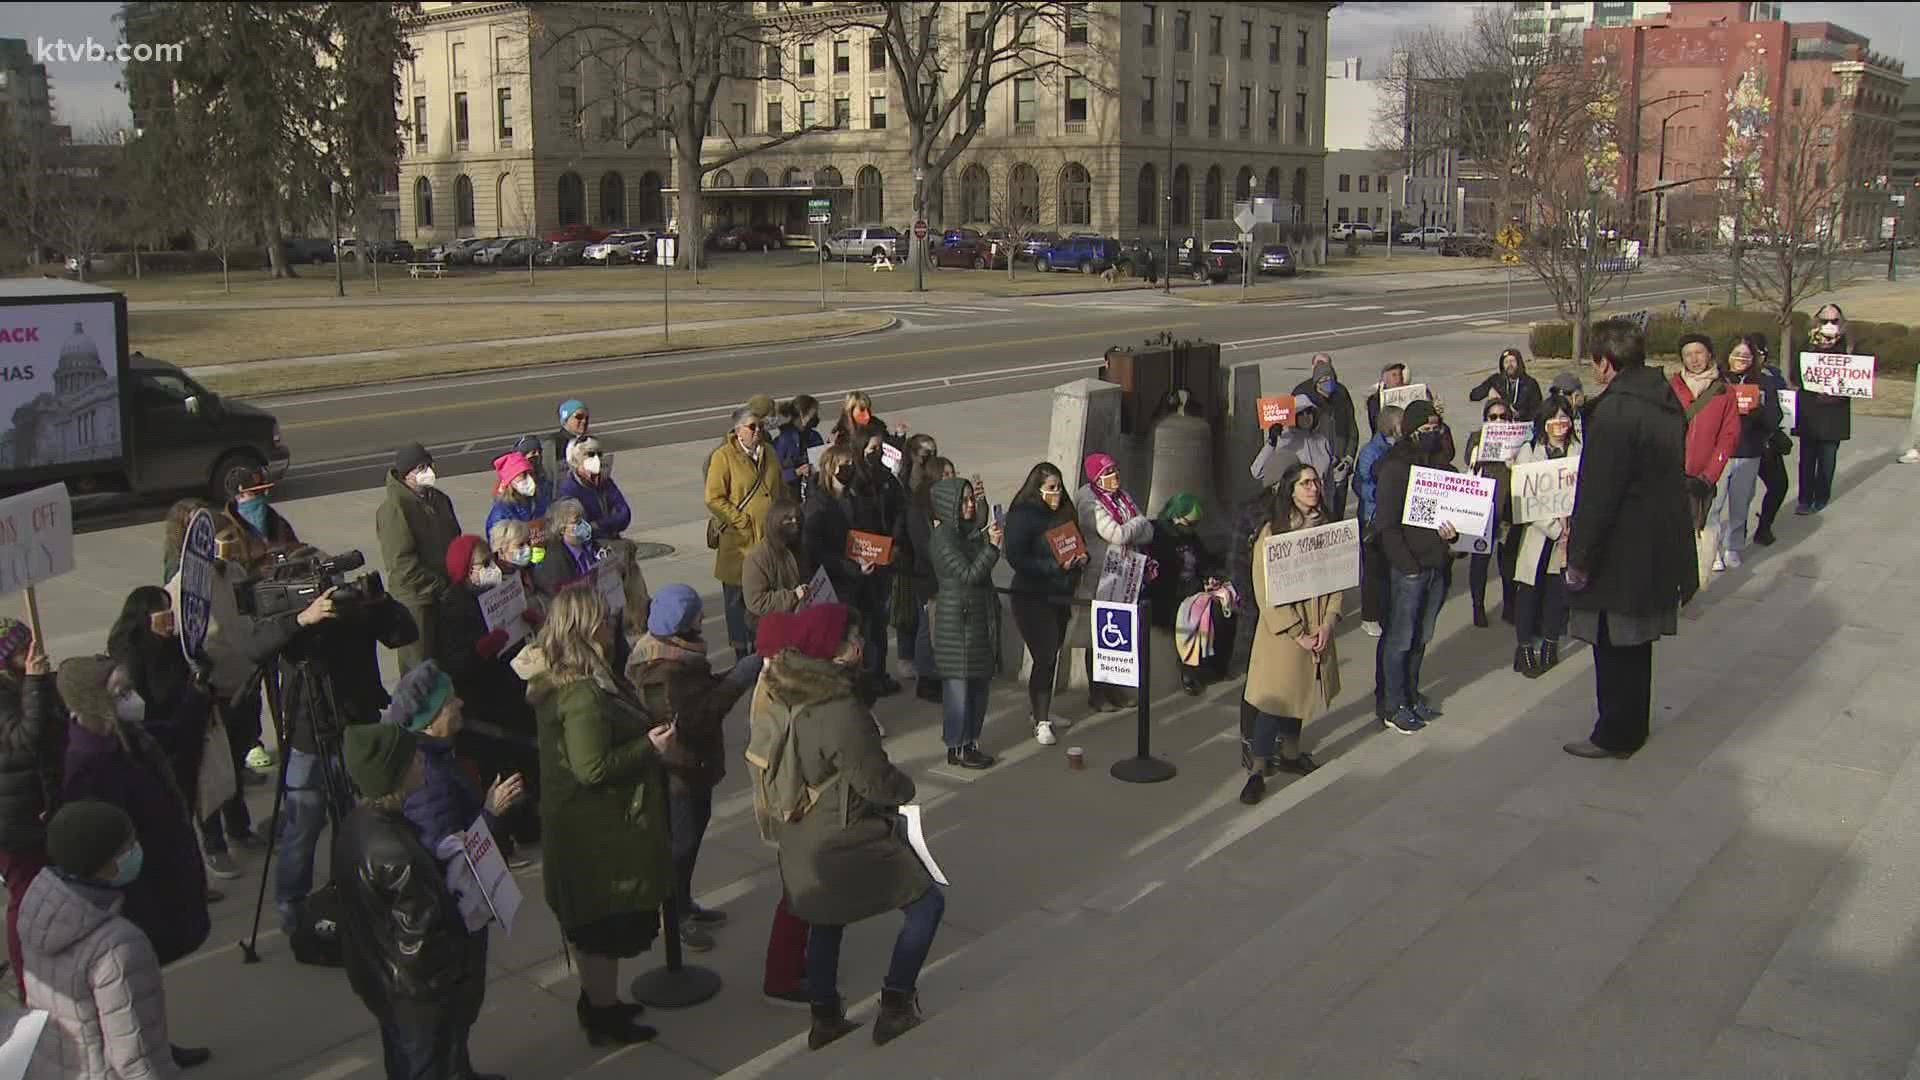 Free Idaho: abortion rights rally in Boise to show opposition to senate bill 1309